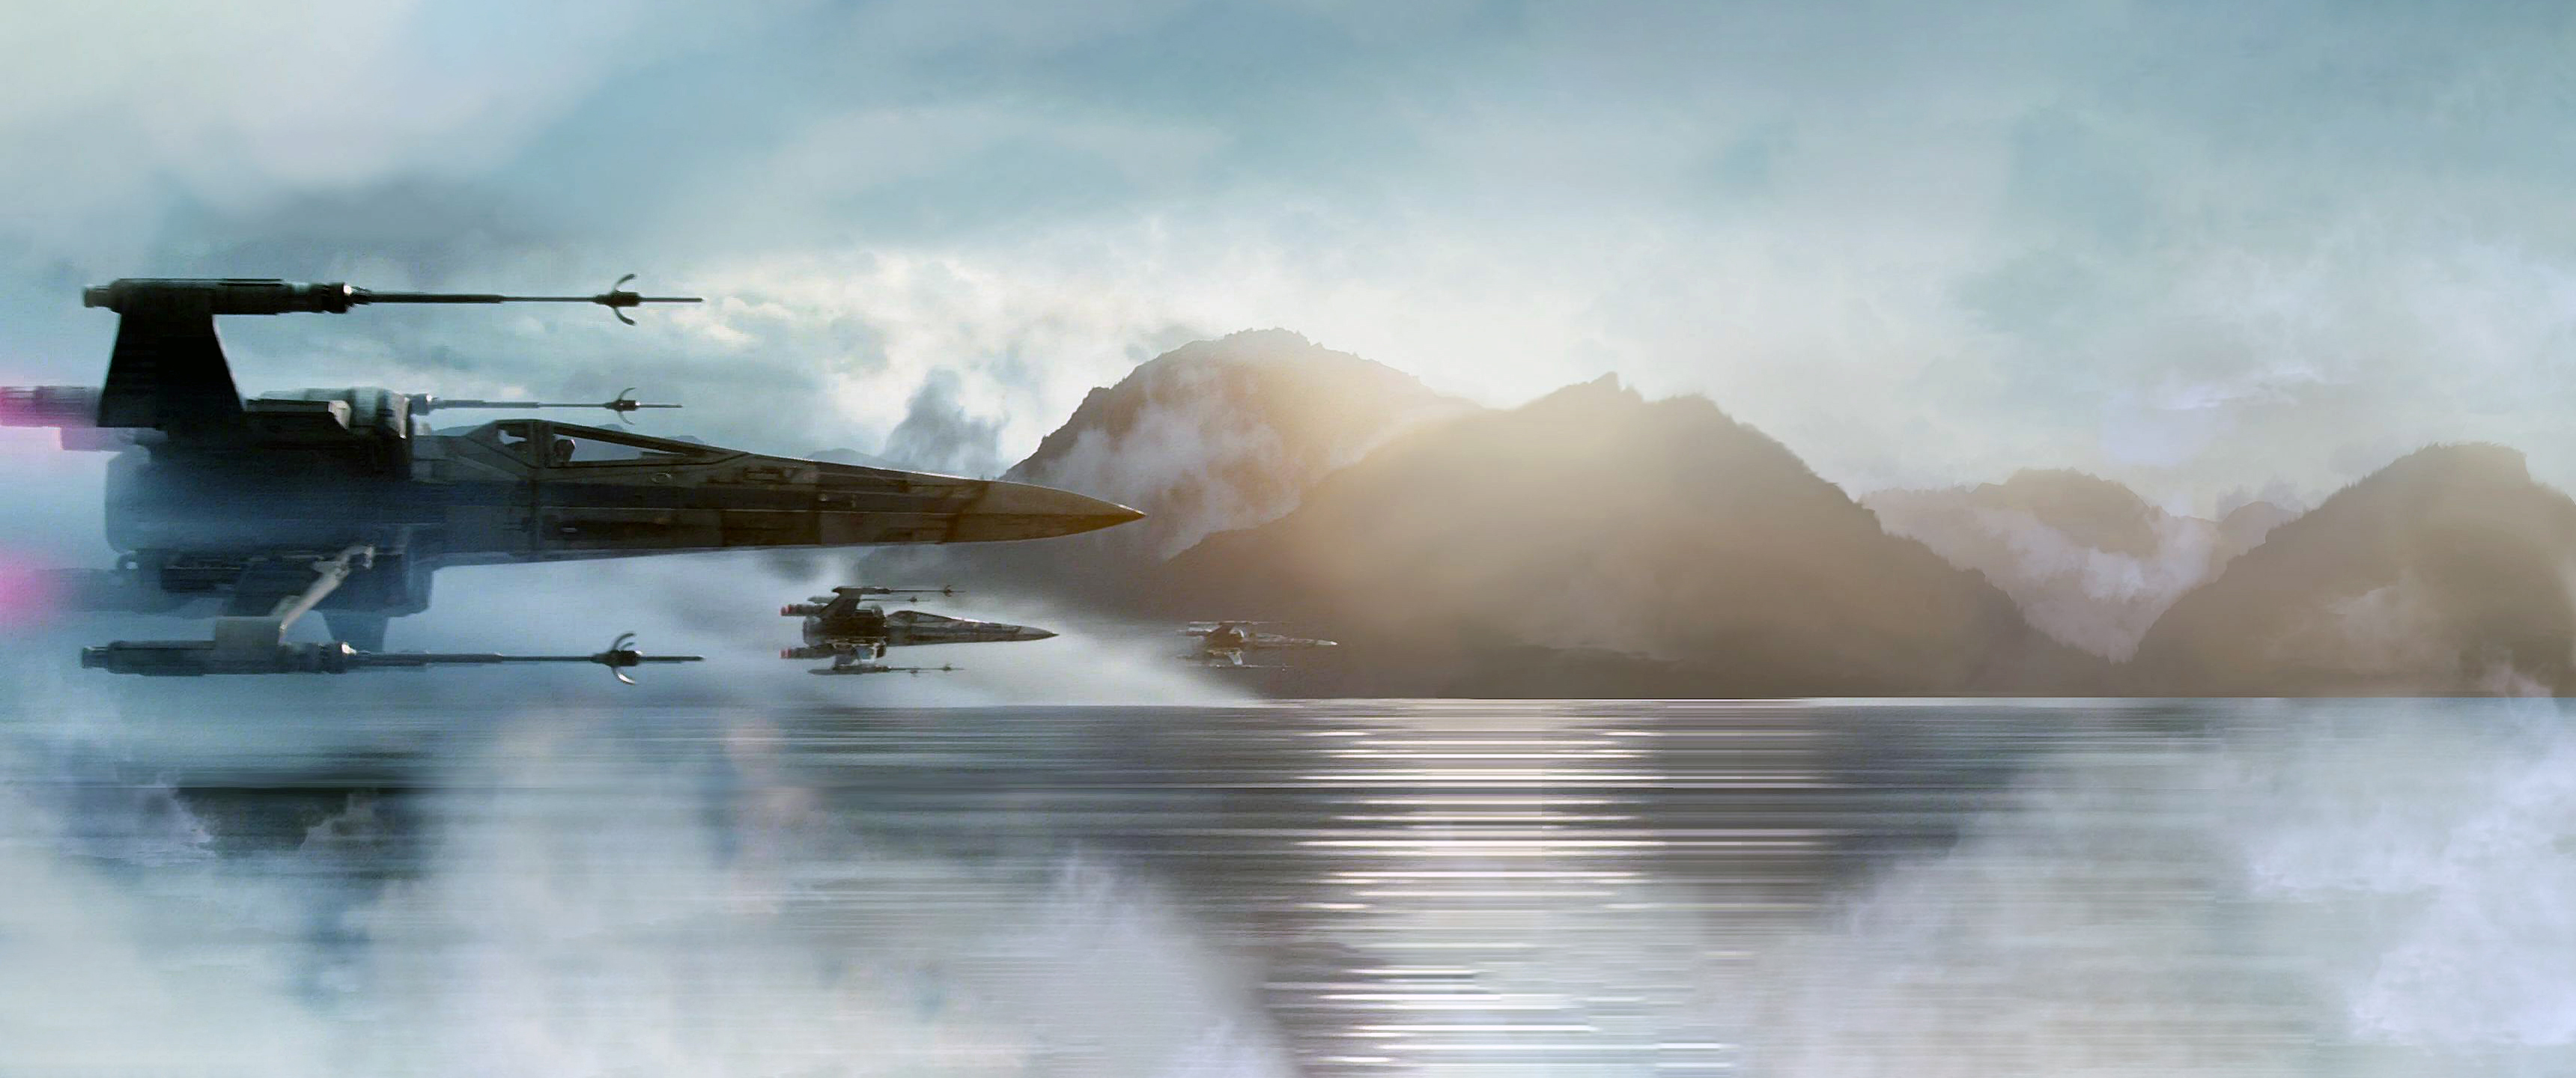 3440x1440] X-Wing from Star Wars: The Force Awakens ...